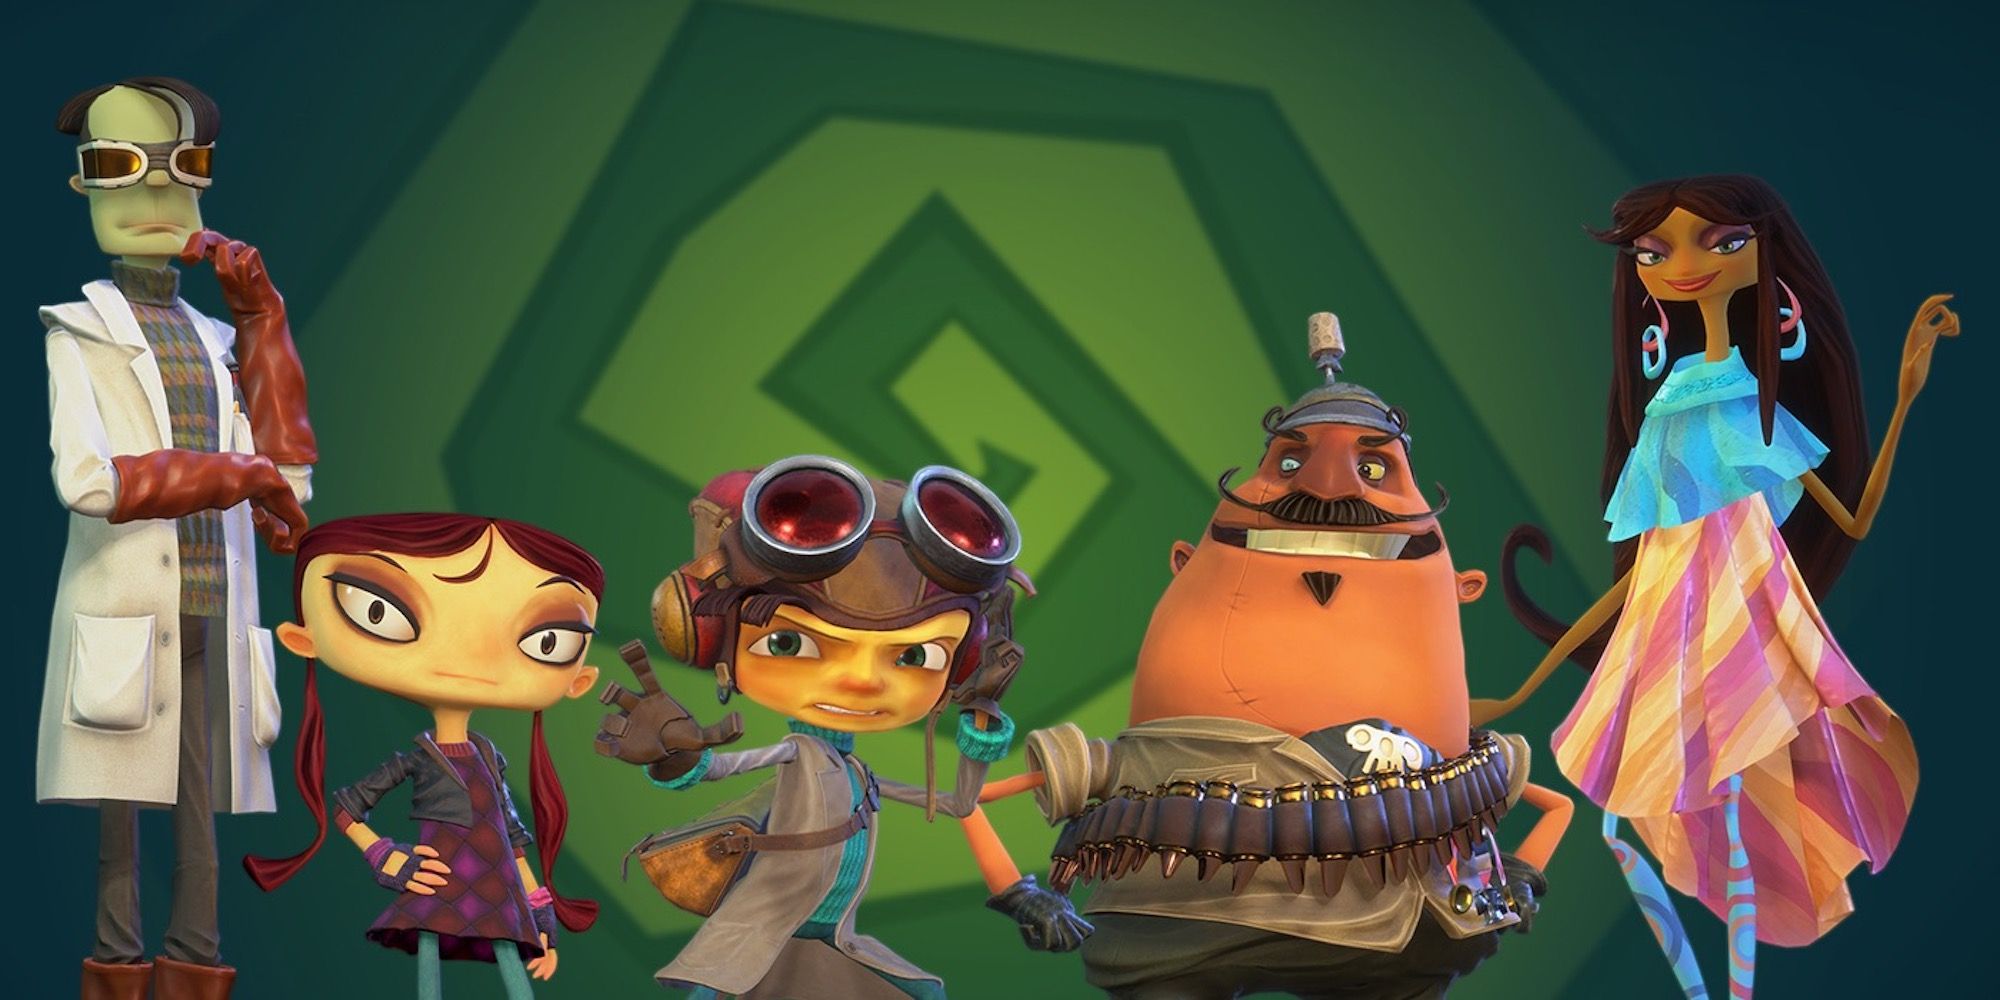 Promo art featuring characters from from Psychonauts 2 